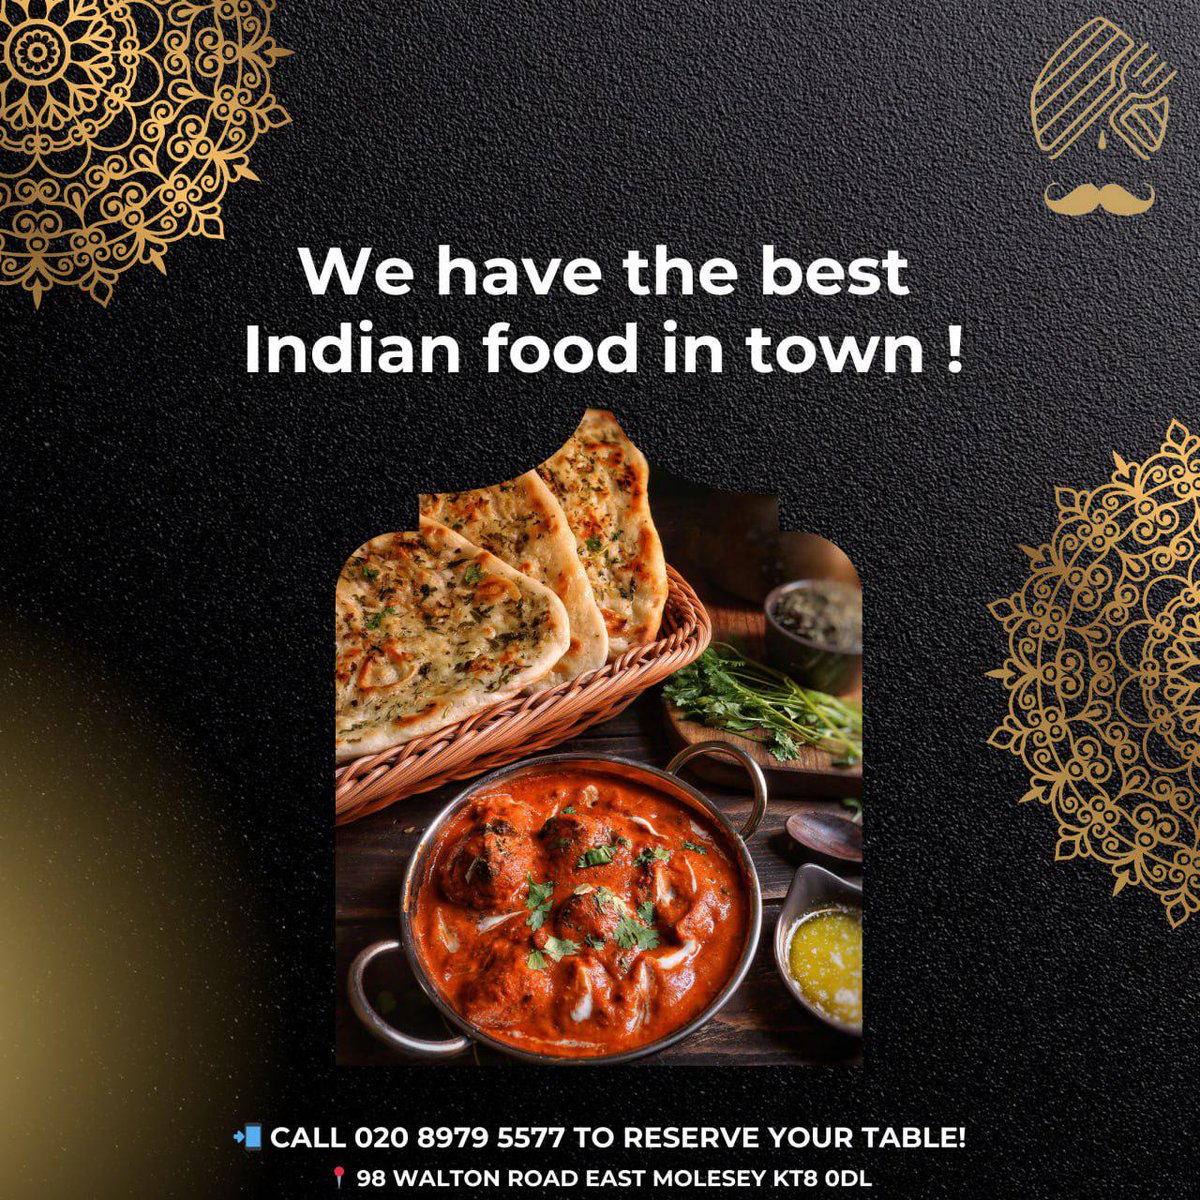 📍 Discover the Best Indian Food in East Molesey at Indian Panorama Restaurant.

😋 Indulge your taste buds in a culinary journey like no other as you step into Indian Panorama Restaurant, your ultimate destination for authentic Indian cuisine in town.